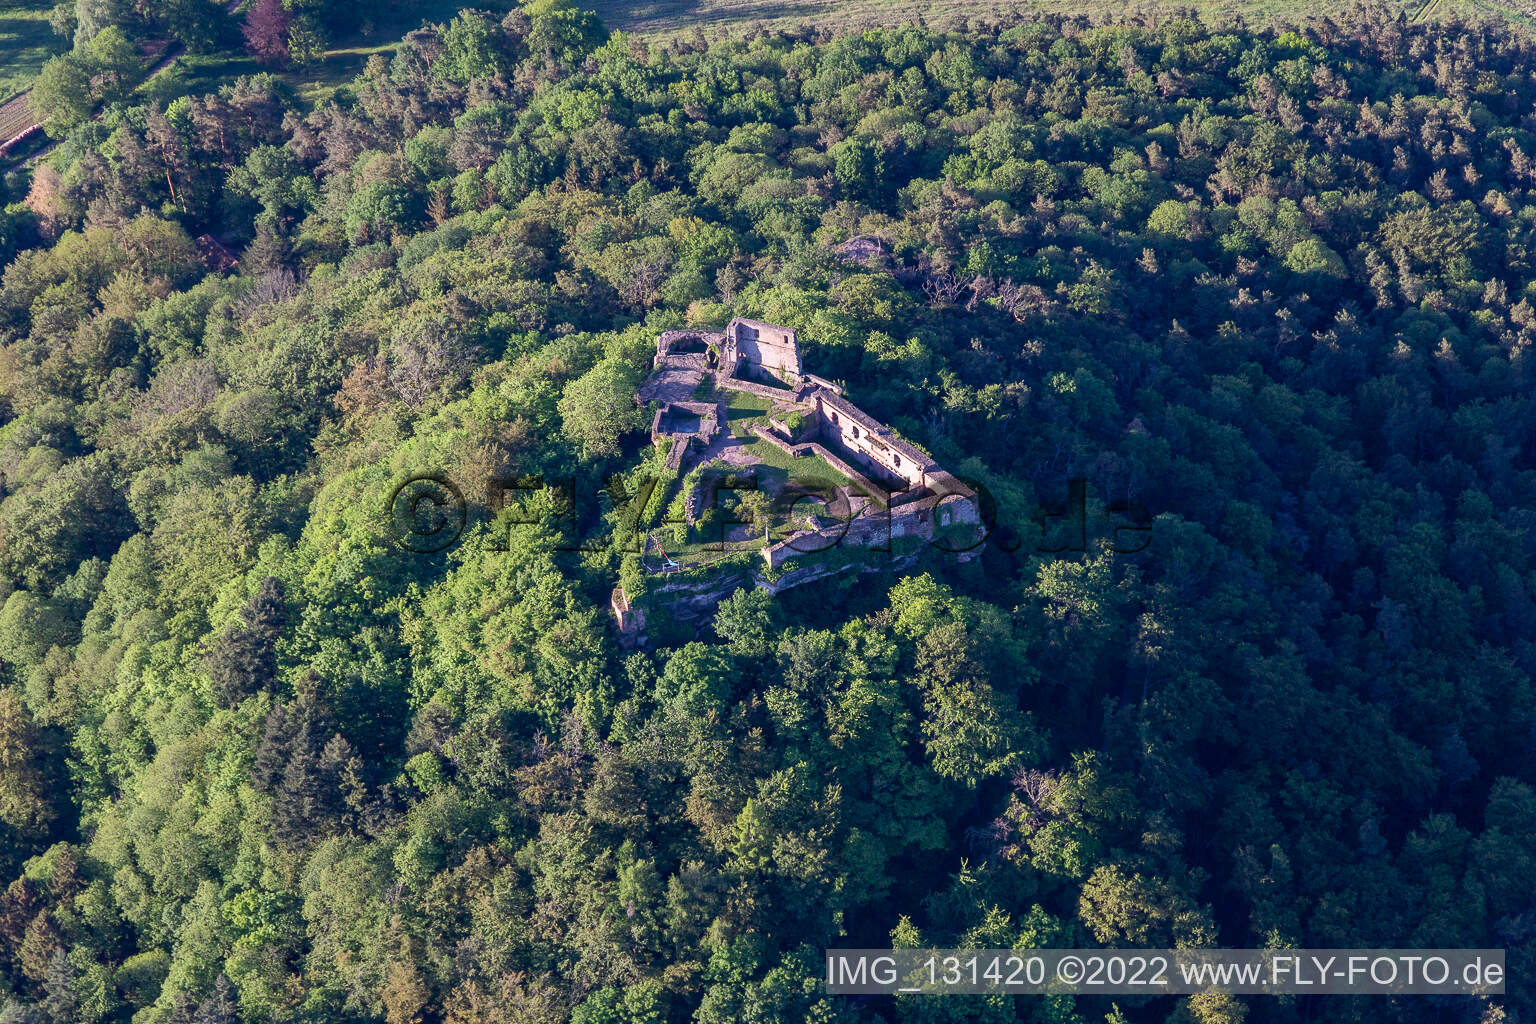 Aerial view of Lindelbrunn castle ruins in Vorderweidenthal in the state Rhineland-Palatinate, Germany